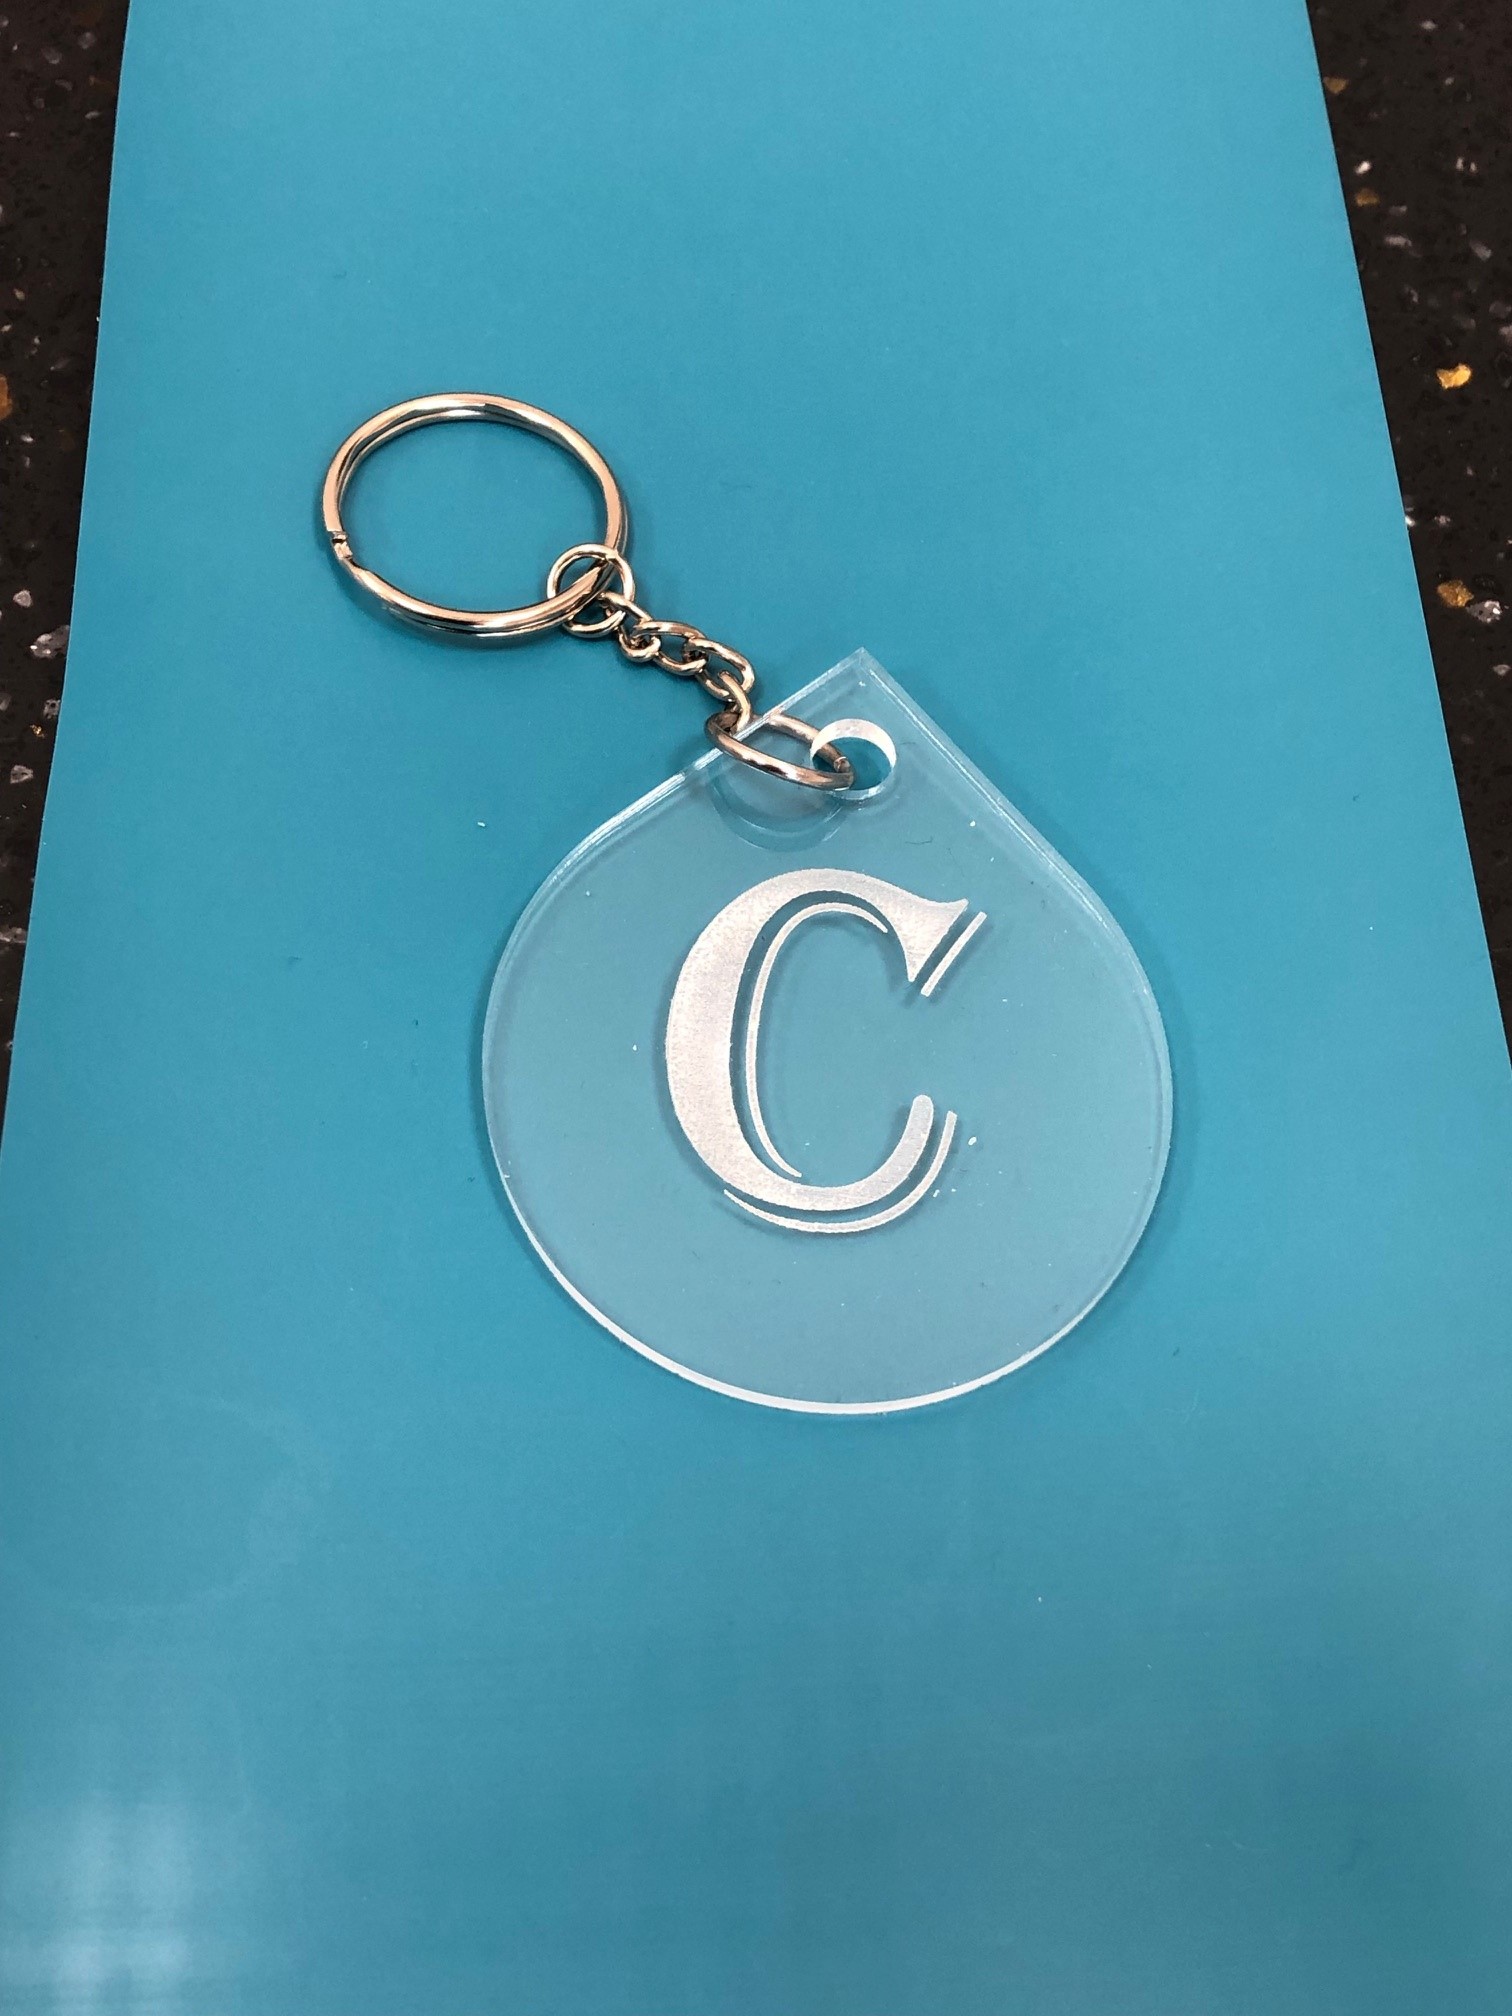 clear keychain with initial C on it